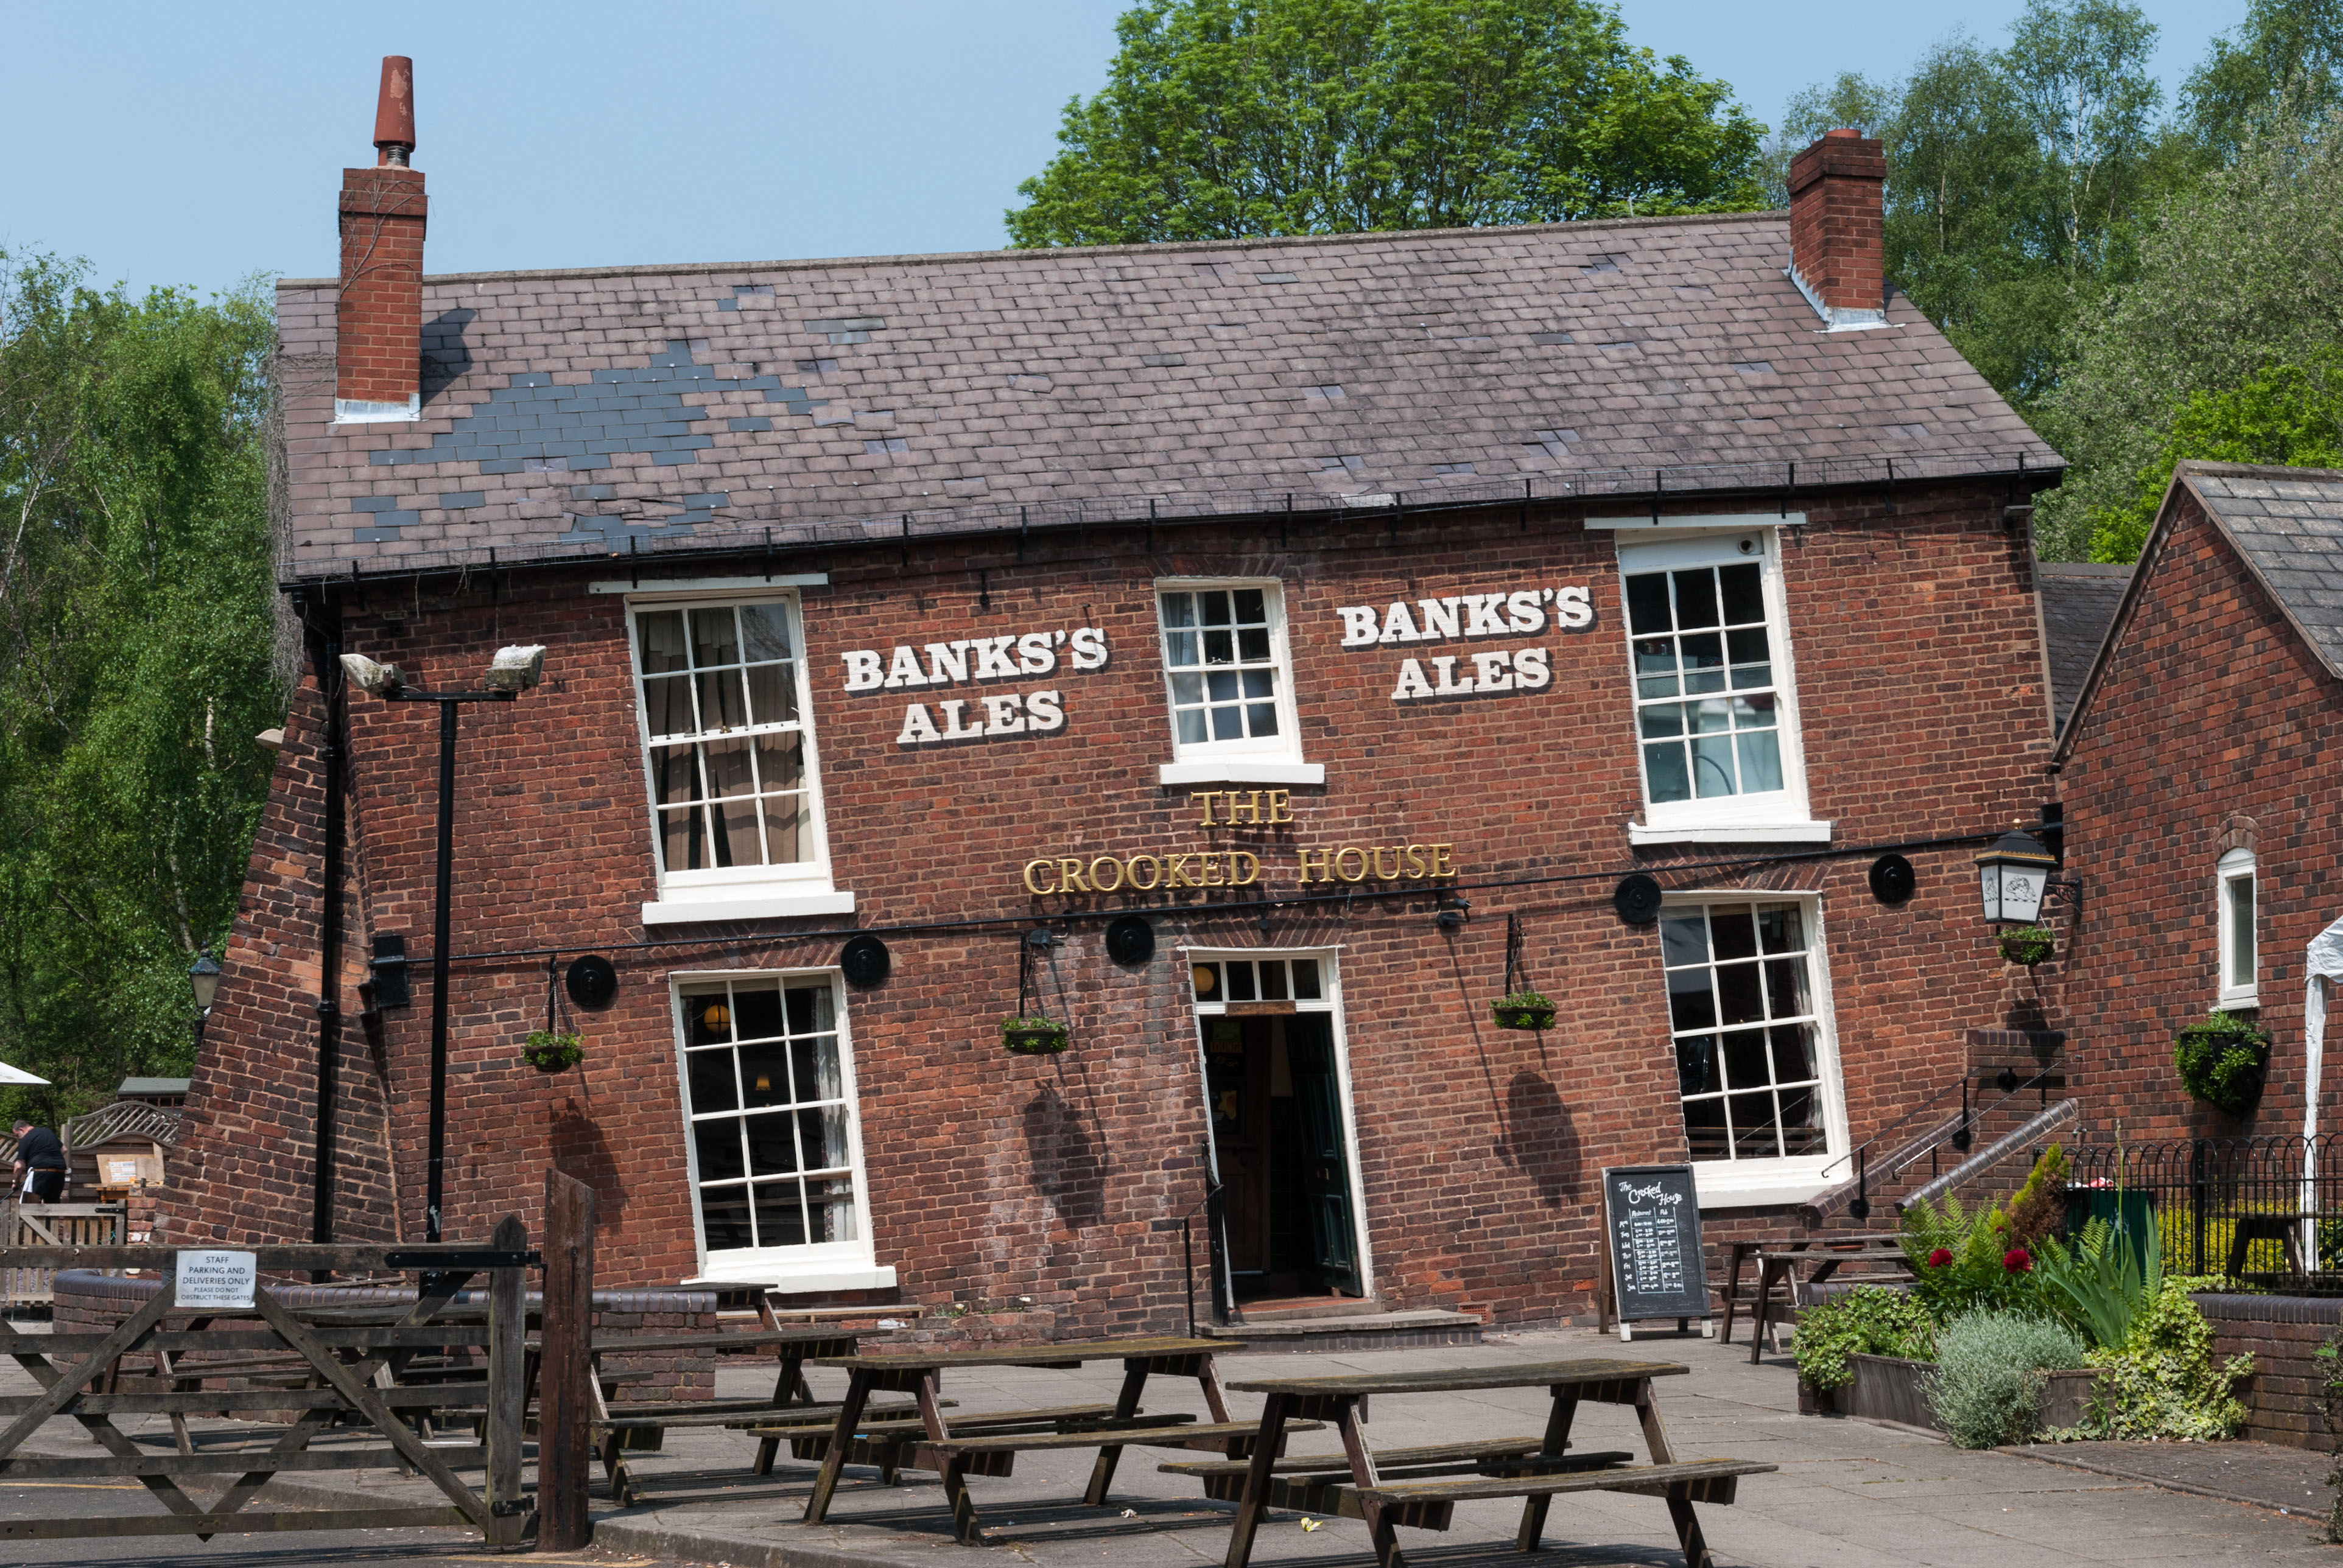 The Crooked House pub was a landmark near Dudley